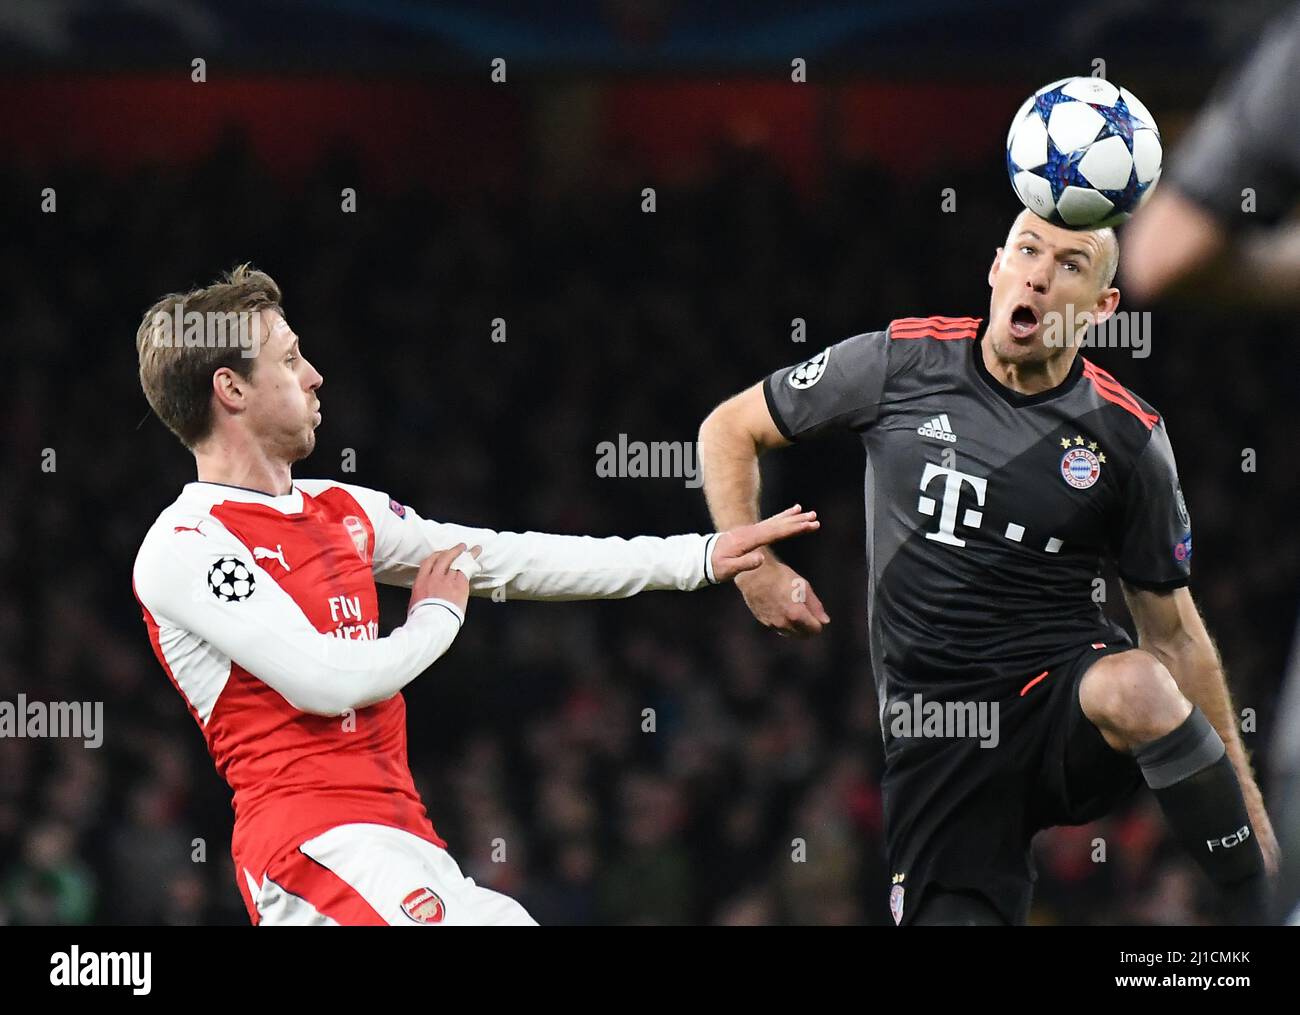 LONDON, ENGLAND - MARCH 7, 2017: Nacho Monreal (L) of Arsenal and Arjen Robben (R) of Bayern pictured in action during the second leg of the UEFA Champions League Round of 16 game between Arsenal FC and Bayern Munchen at Emirates Stadium. Copyright: Cosmin Iftode/Picstaff Stock Photo